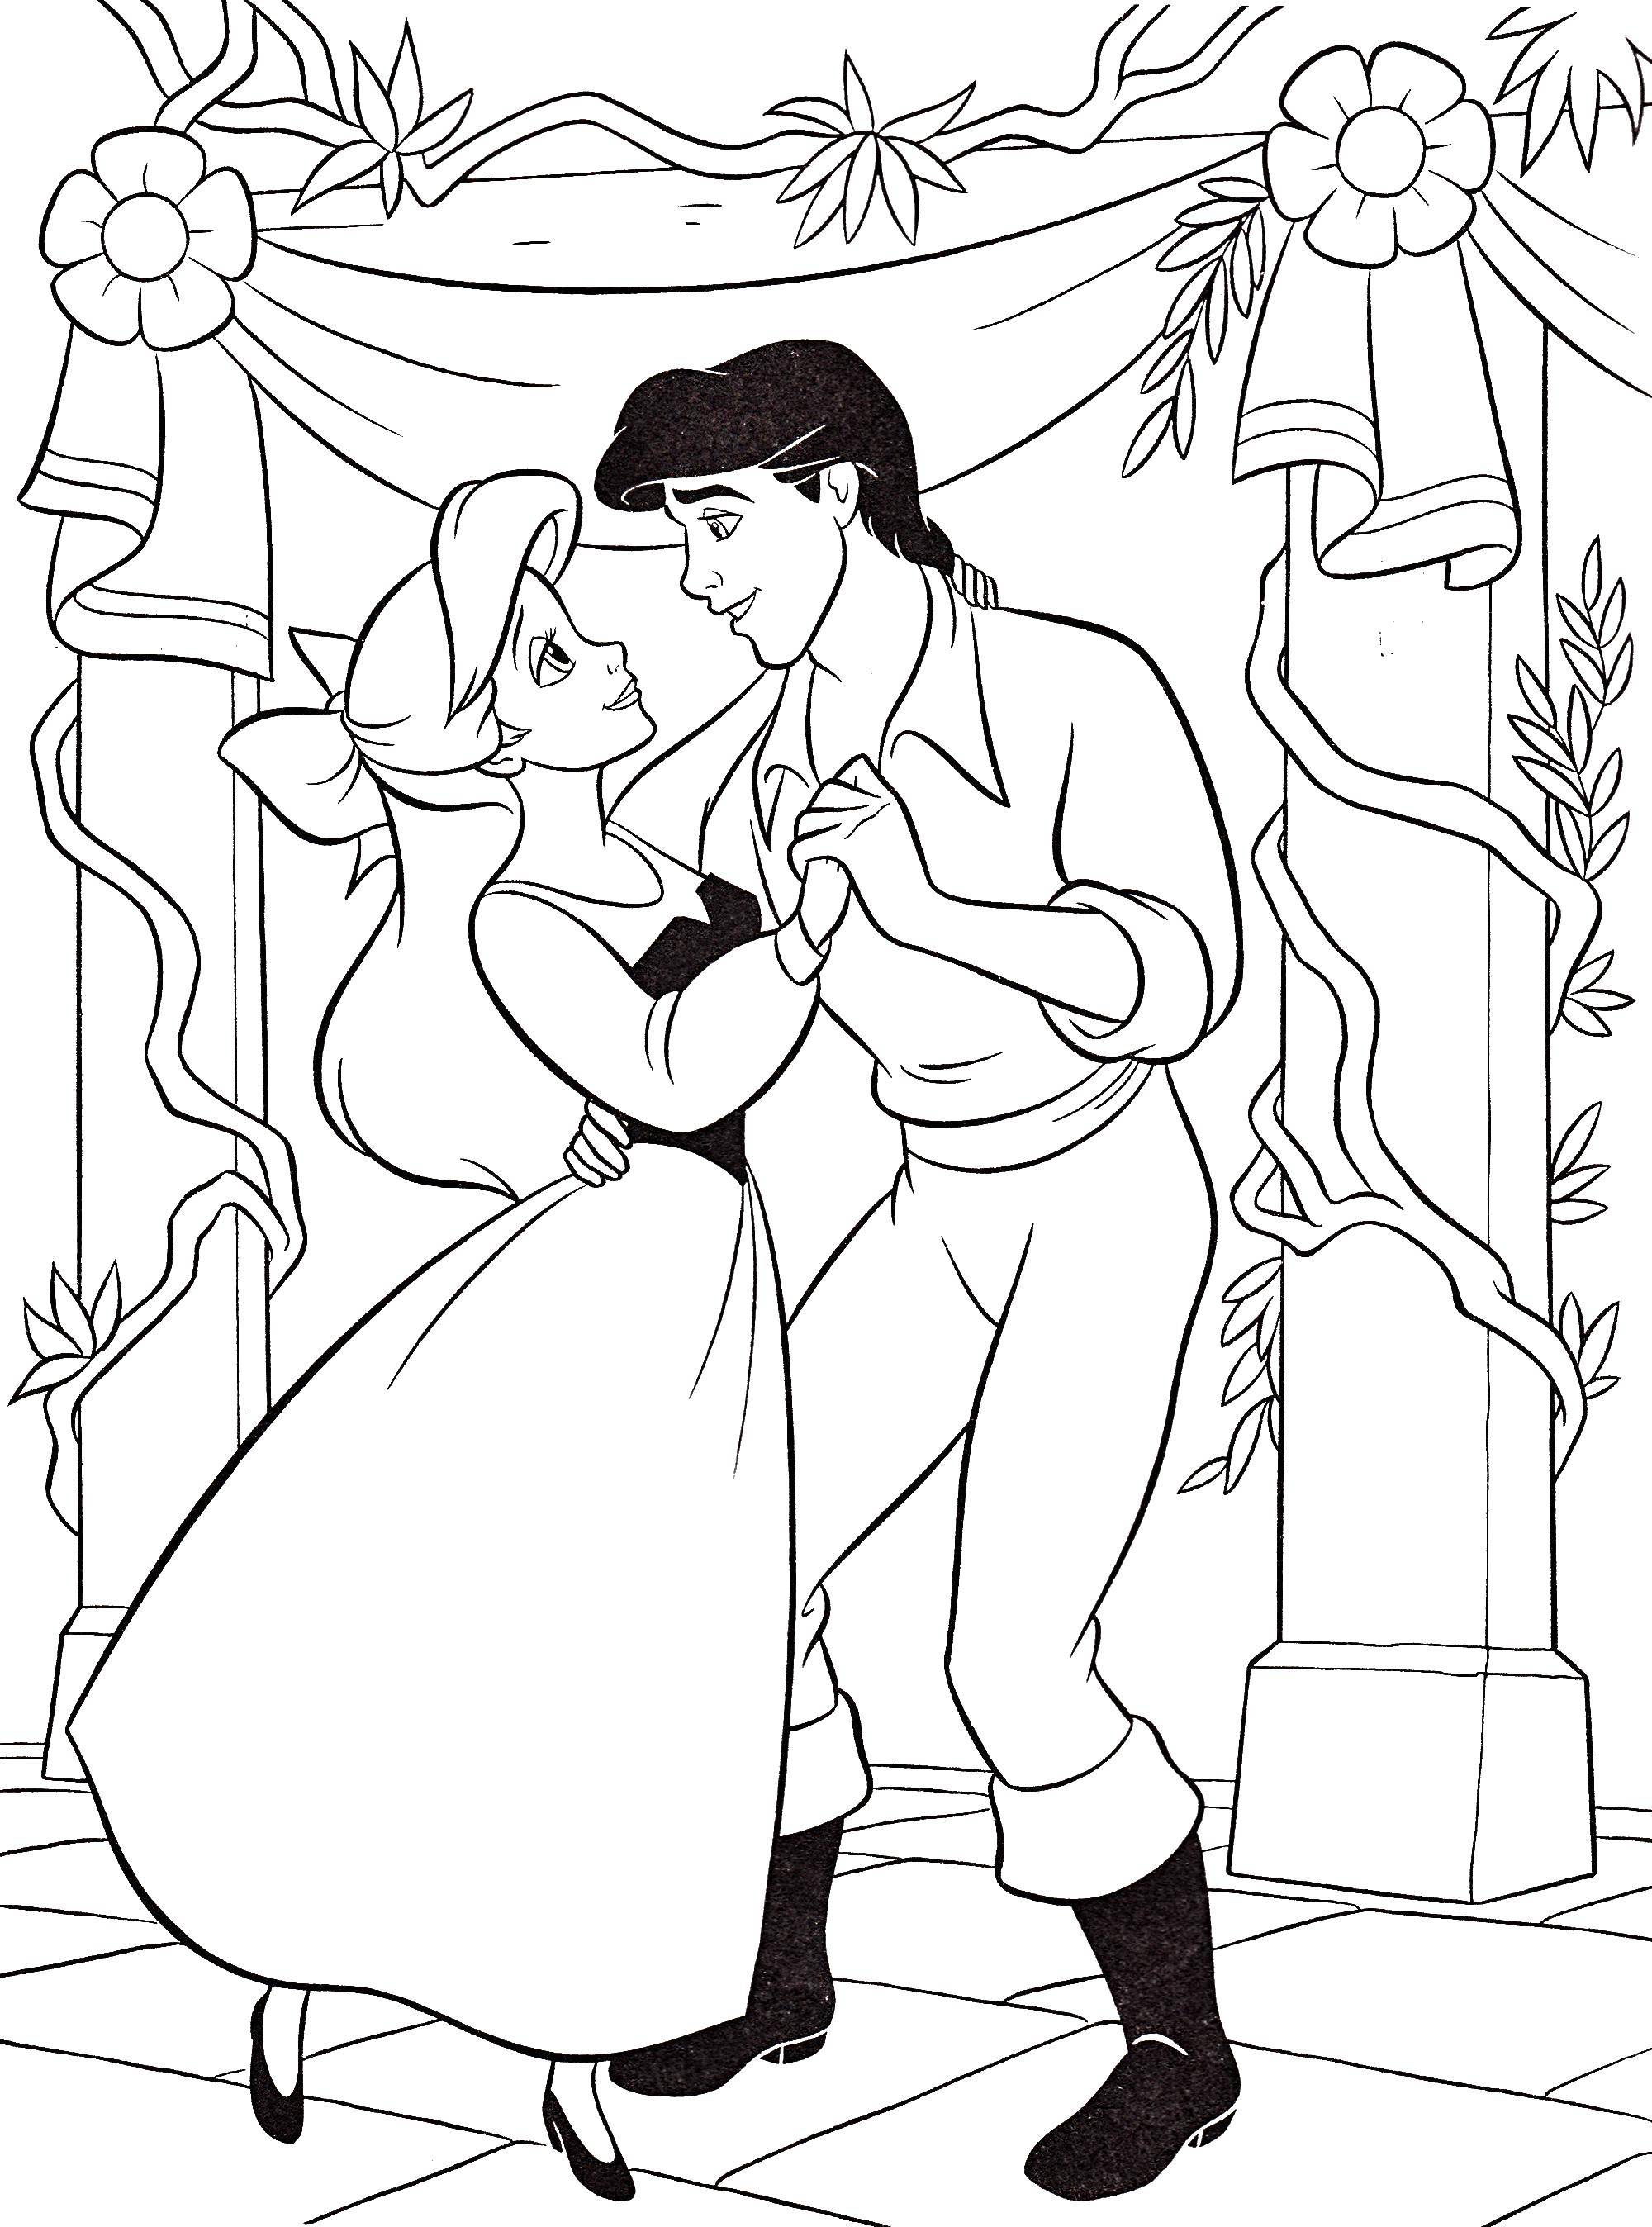 Coloring The Prince with Cinderella. Category Disney cartoons. Tags:  the Prince, Cinderella.